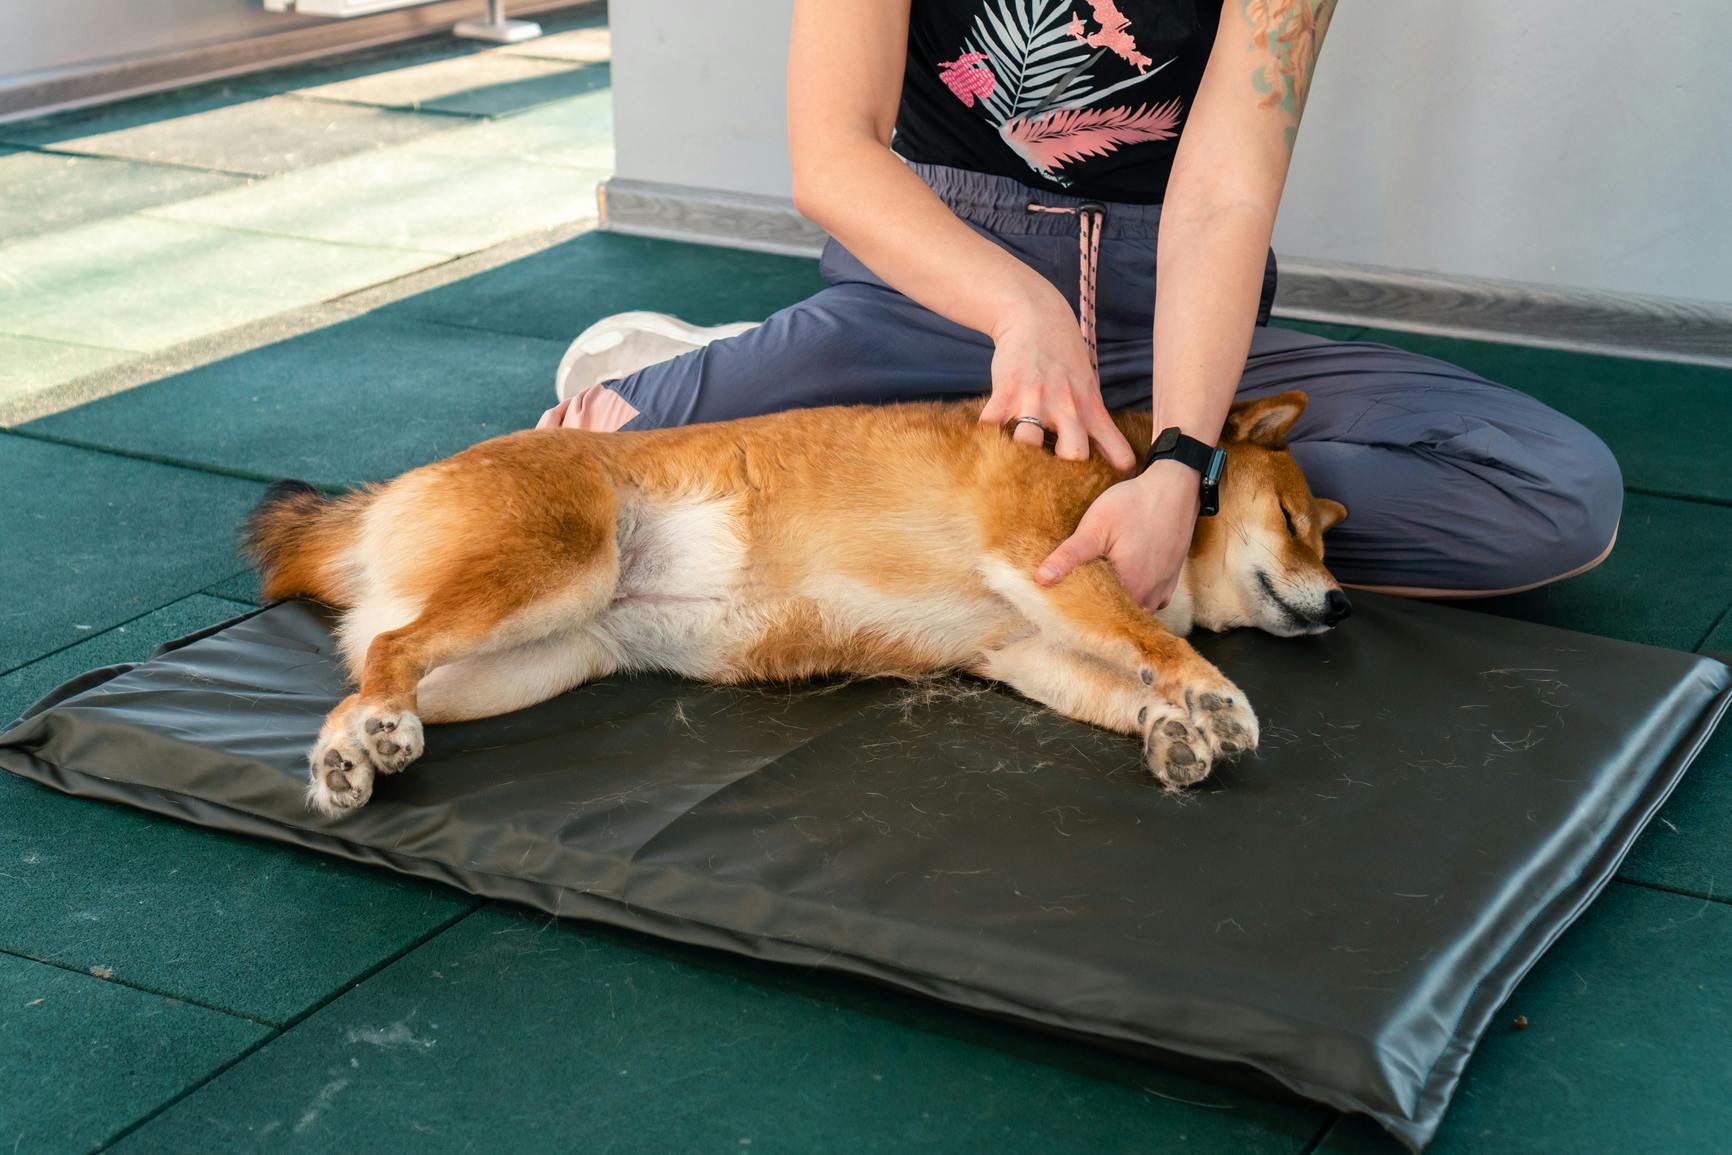 Dog lying on its side on a mat getting a massage.